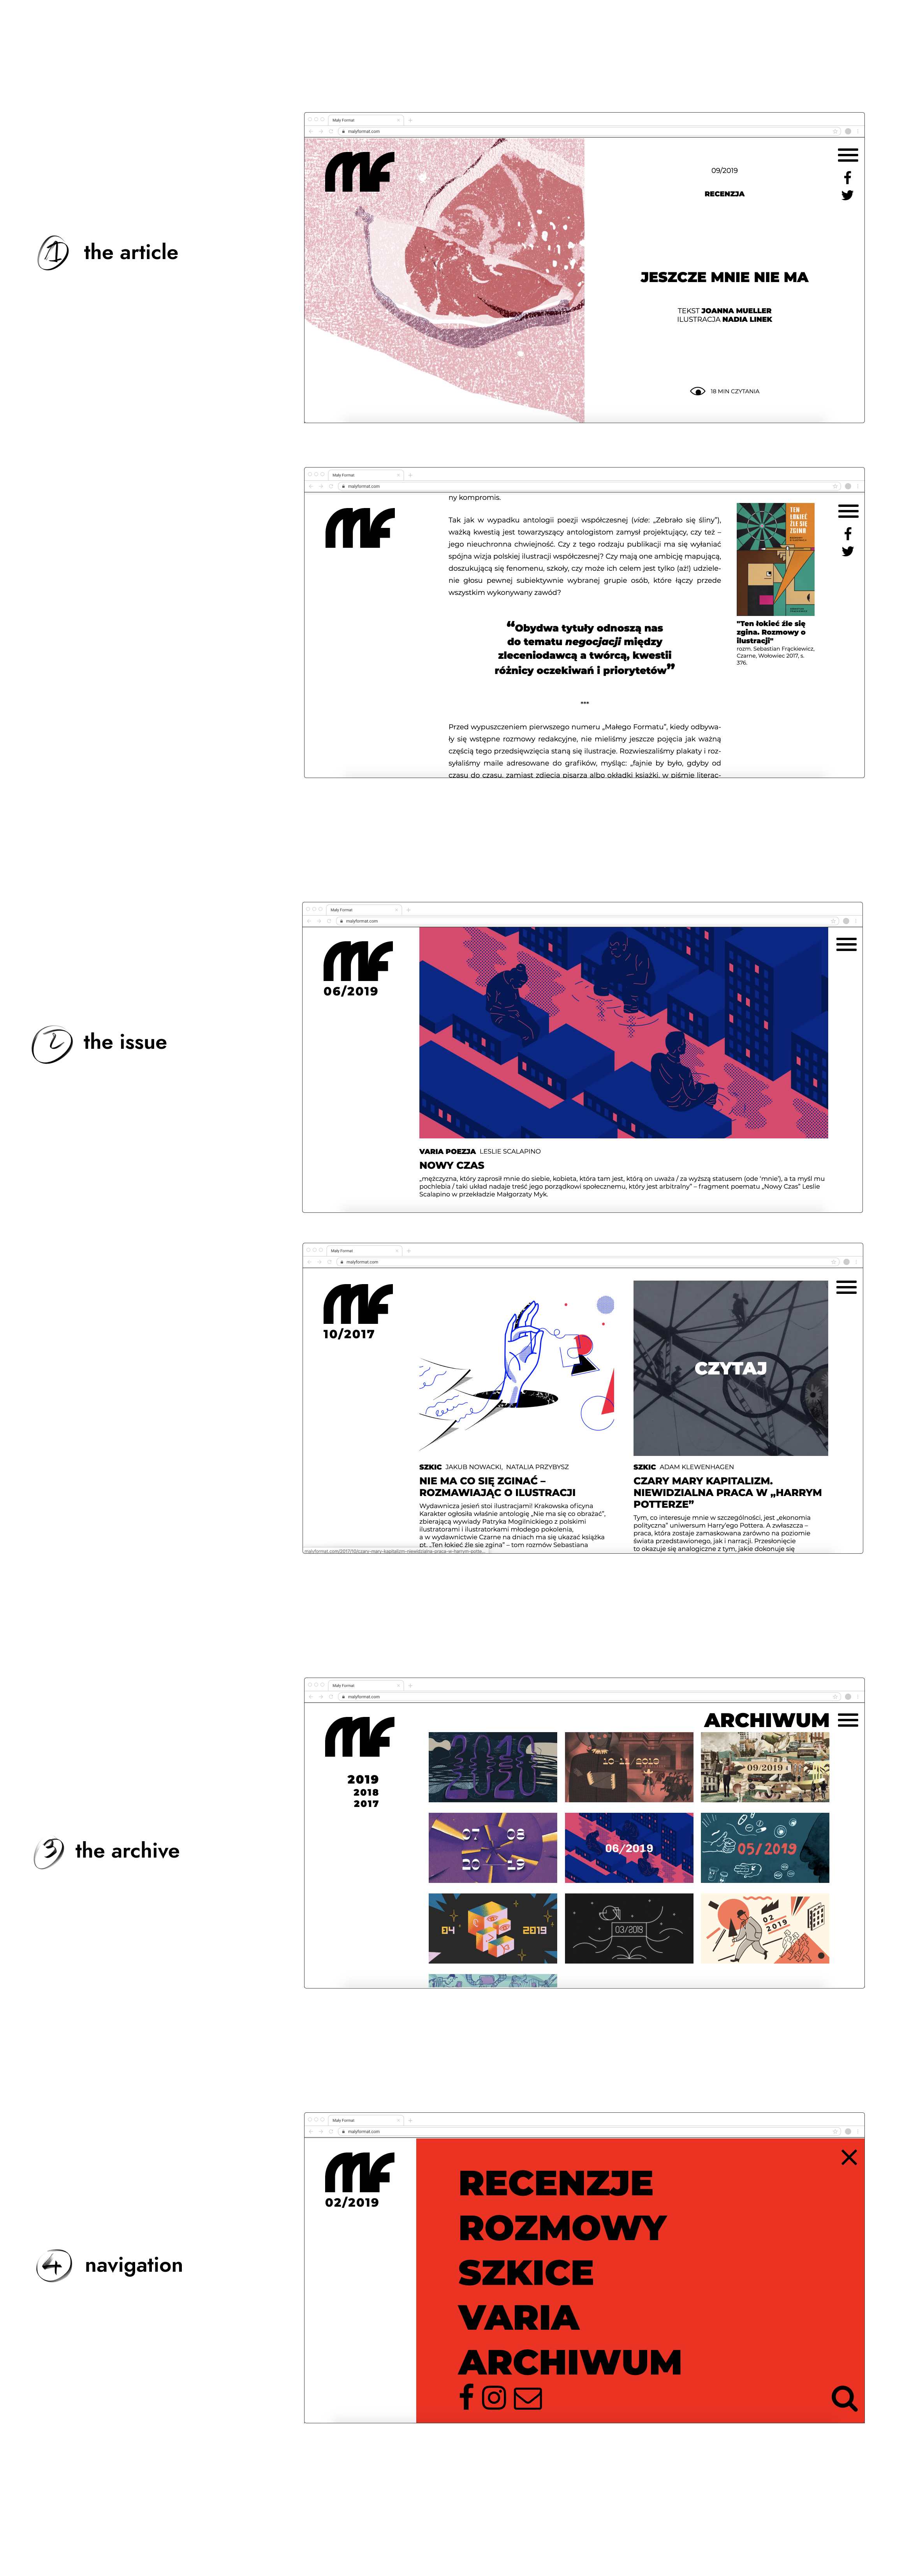 Screens of Mały Format's pages and articles